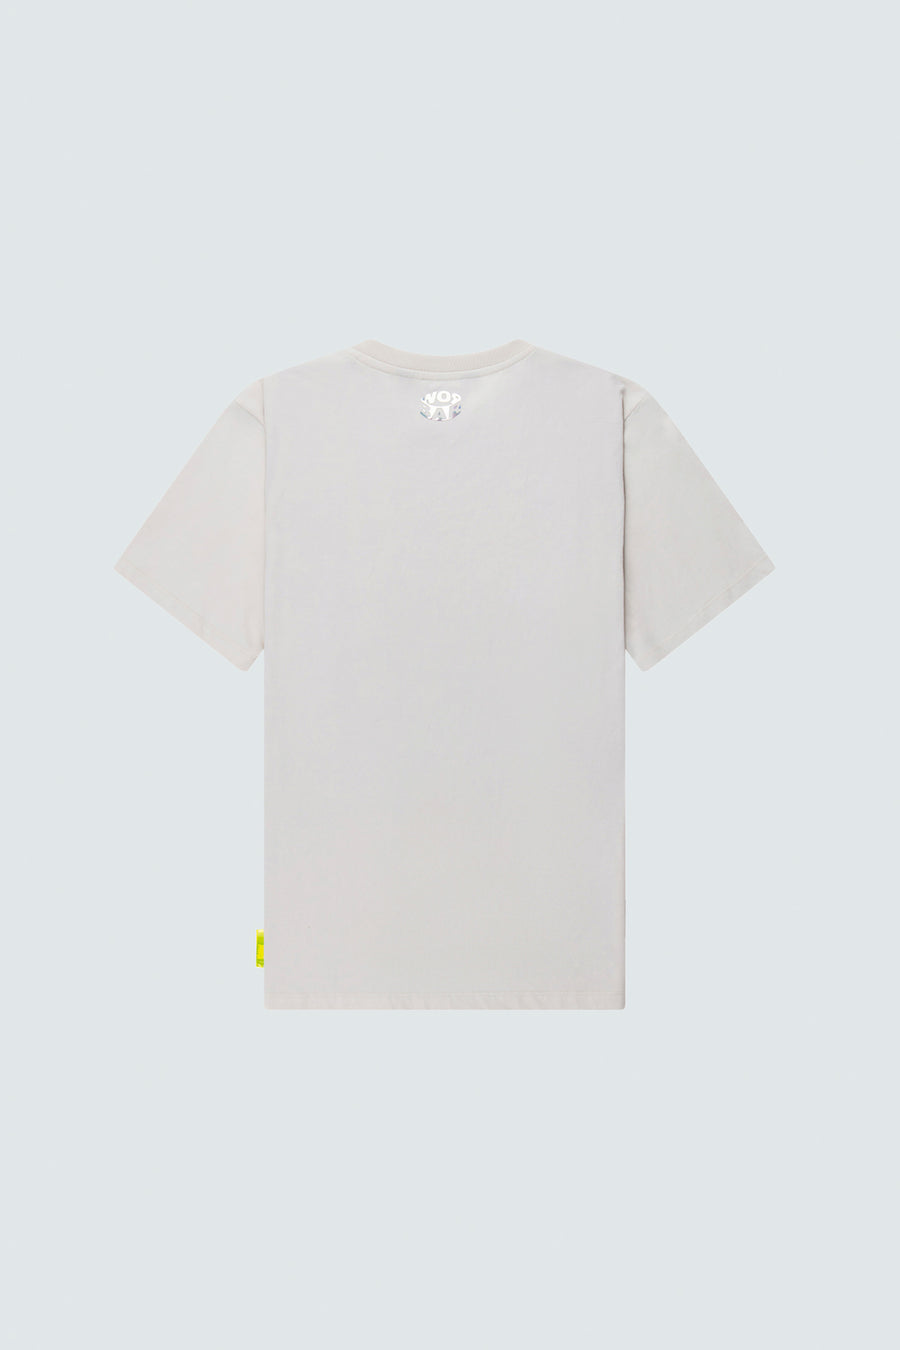 Buy the Barrow Minimal Smiley Logo T-Shirt in White at Intro. Spend £50 for free UK delivery. Official stockists. We ship worldwide.